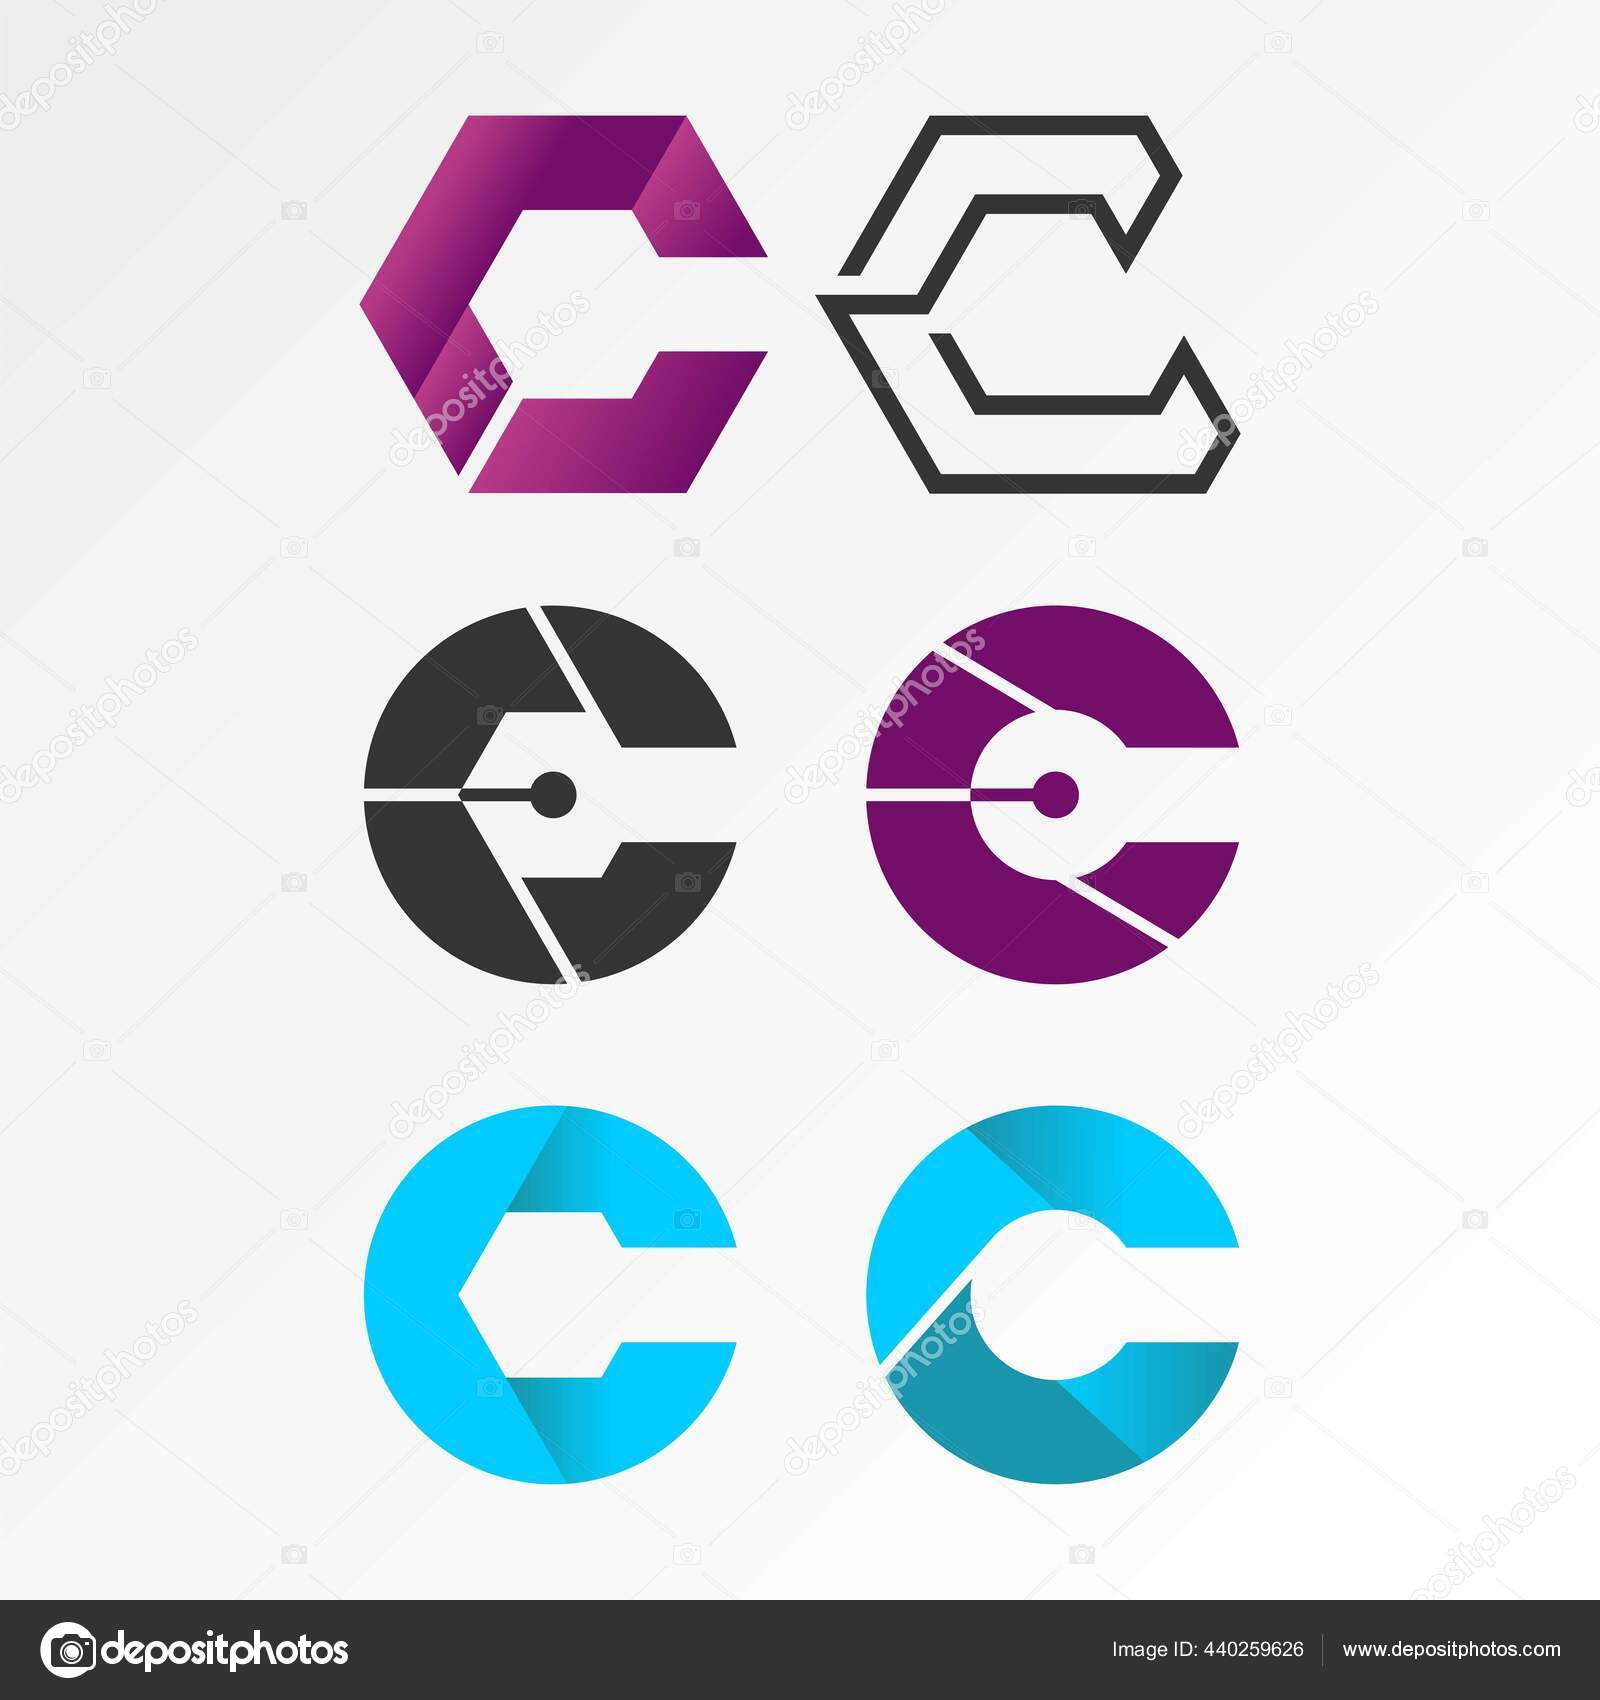 Some Designs Letter Different Variations Vector Image By C Ags Biyan Yahoo Com Vector Stock 440259626